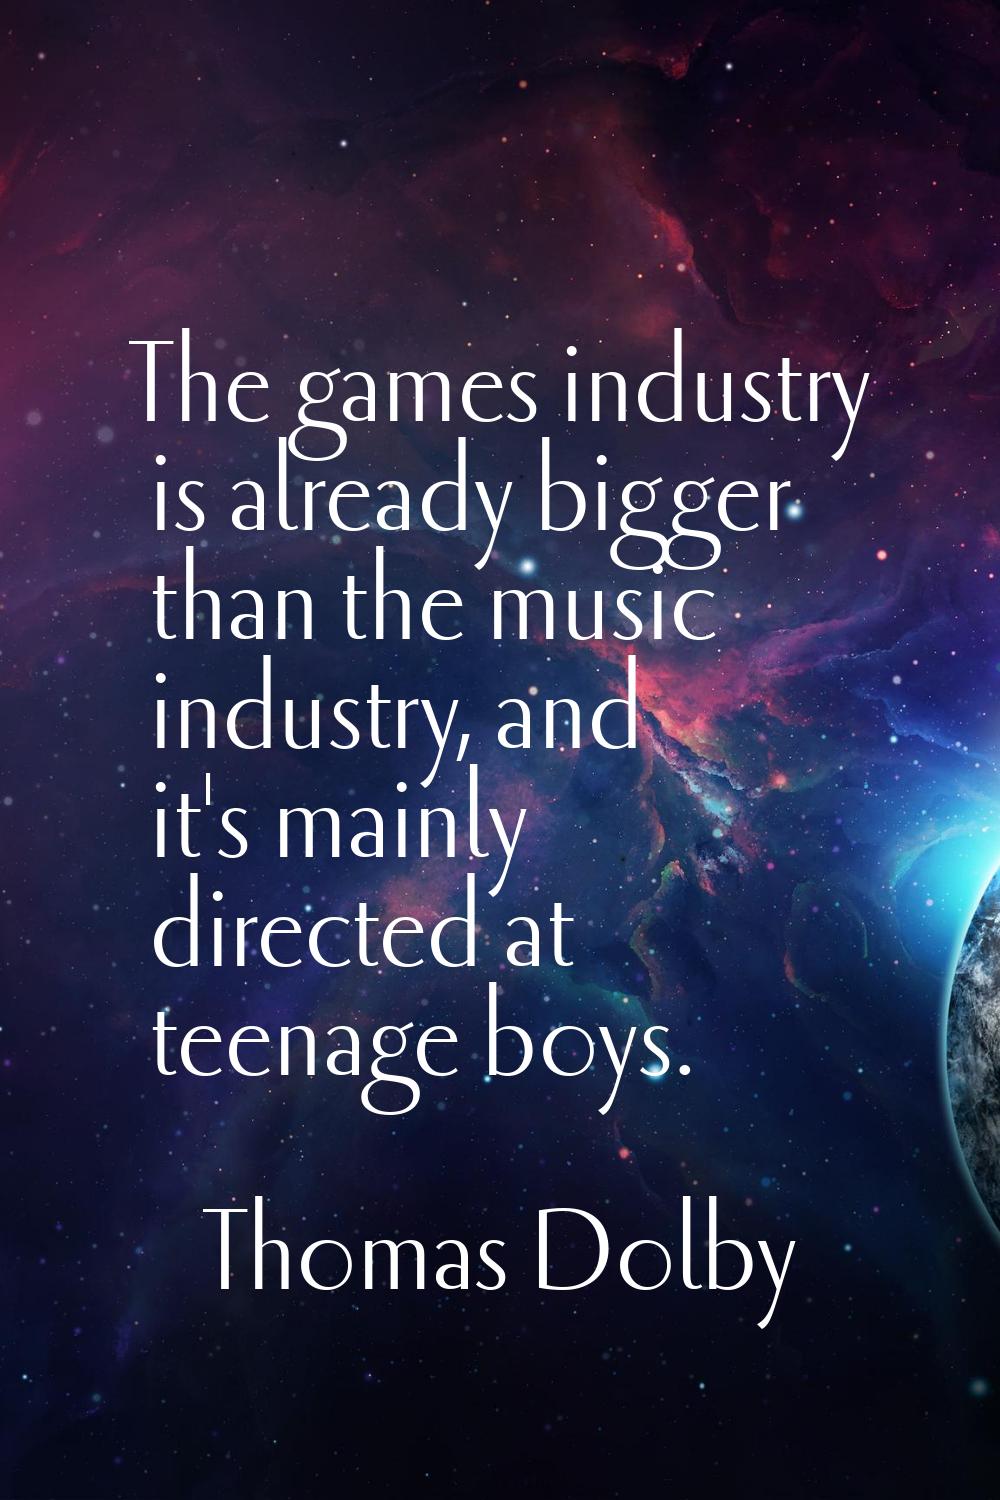 The games industry is already bigger than the music industry, and it's mainly directed at teenage b